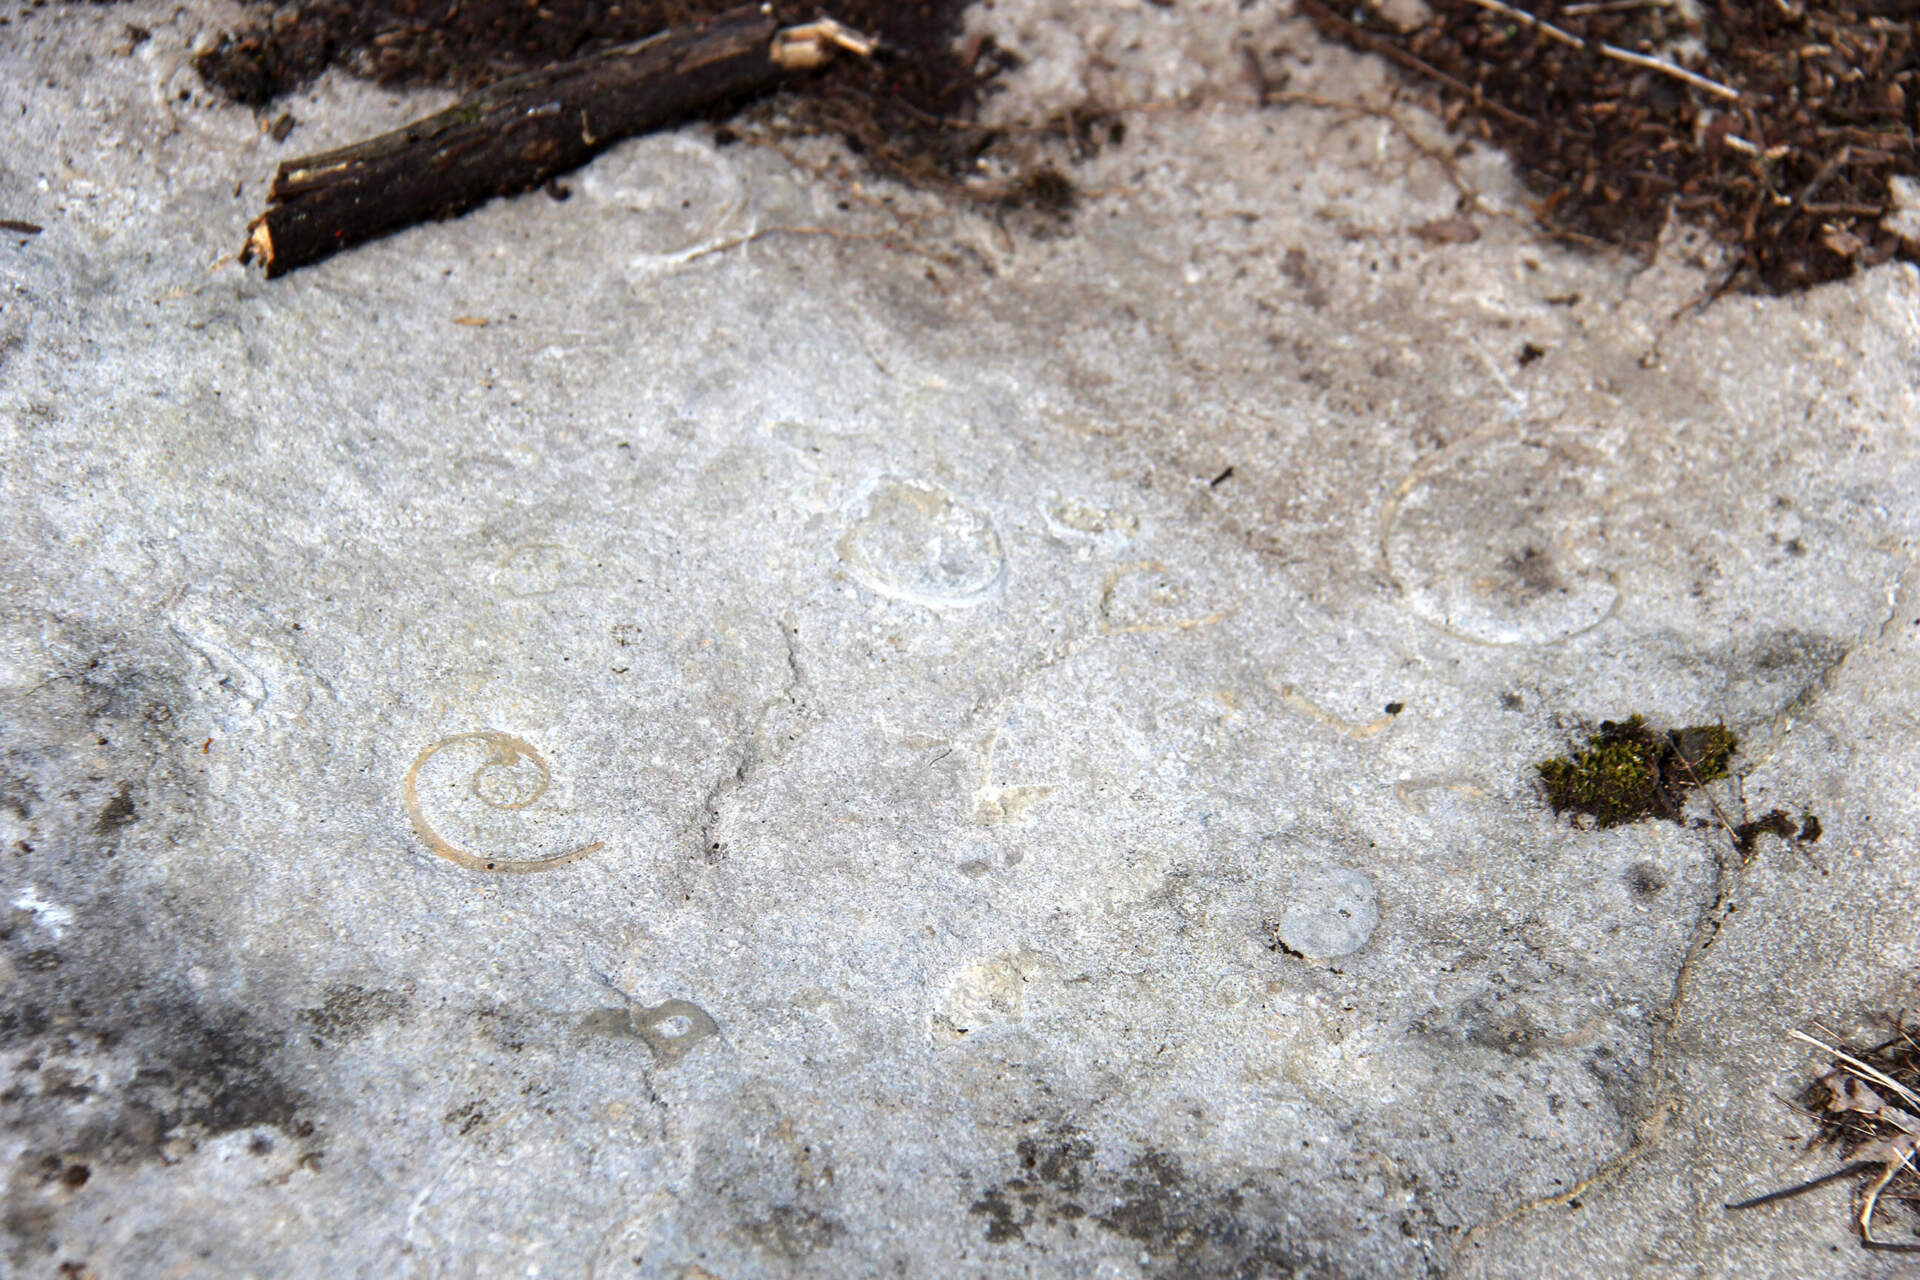 Spiral-shaped fossils seem at the Goodsell Ridge Fossil Preserve in Isle La Mott, which is a part of the larger Chazy Fossil Reef, seen on June 13. (Sophie Stevens/Vermont Public)